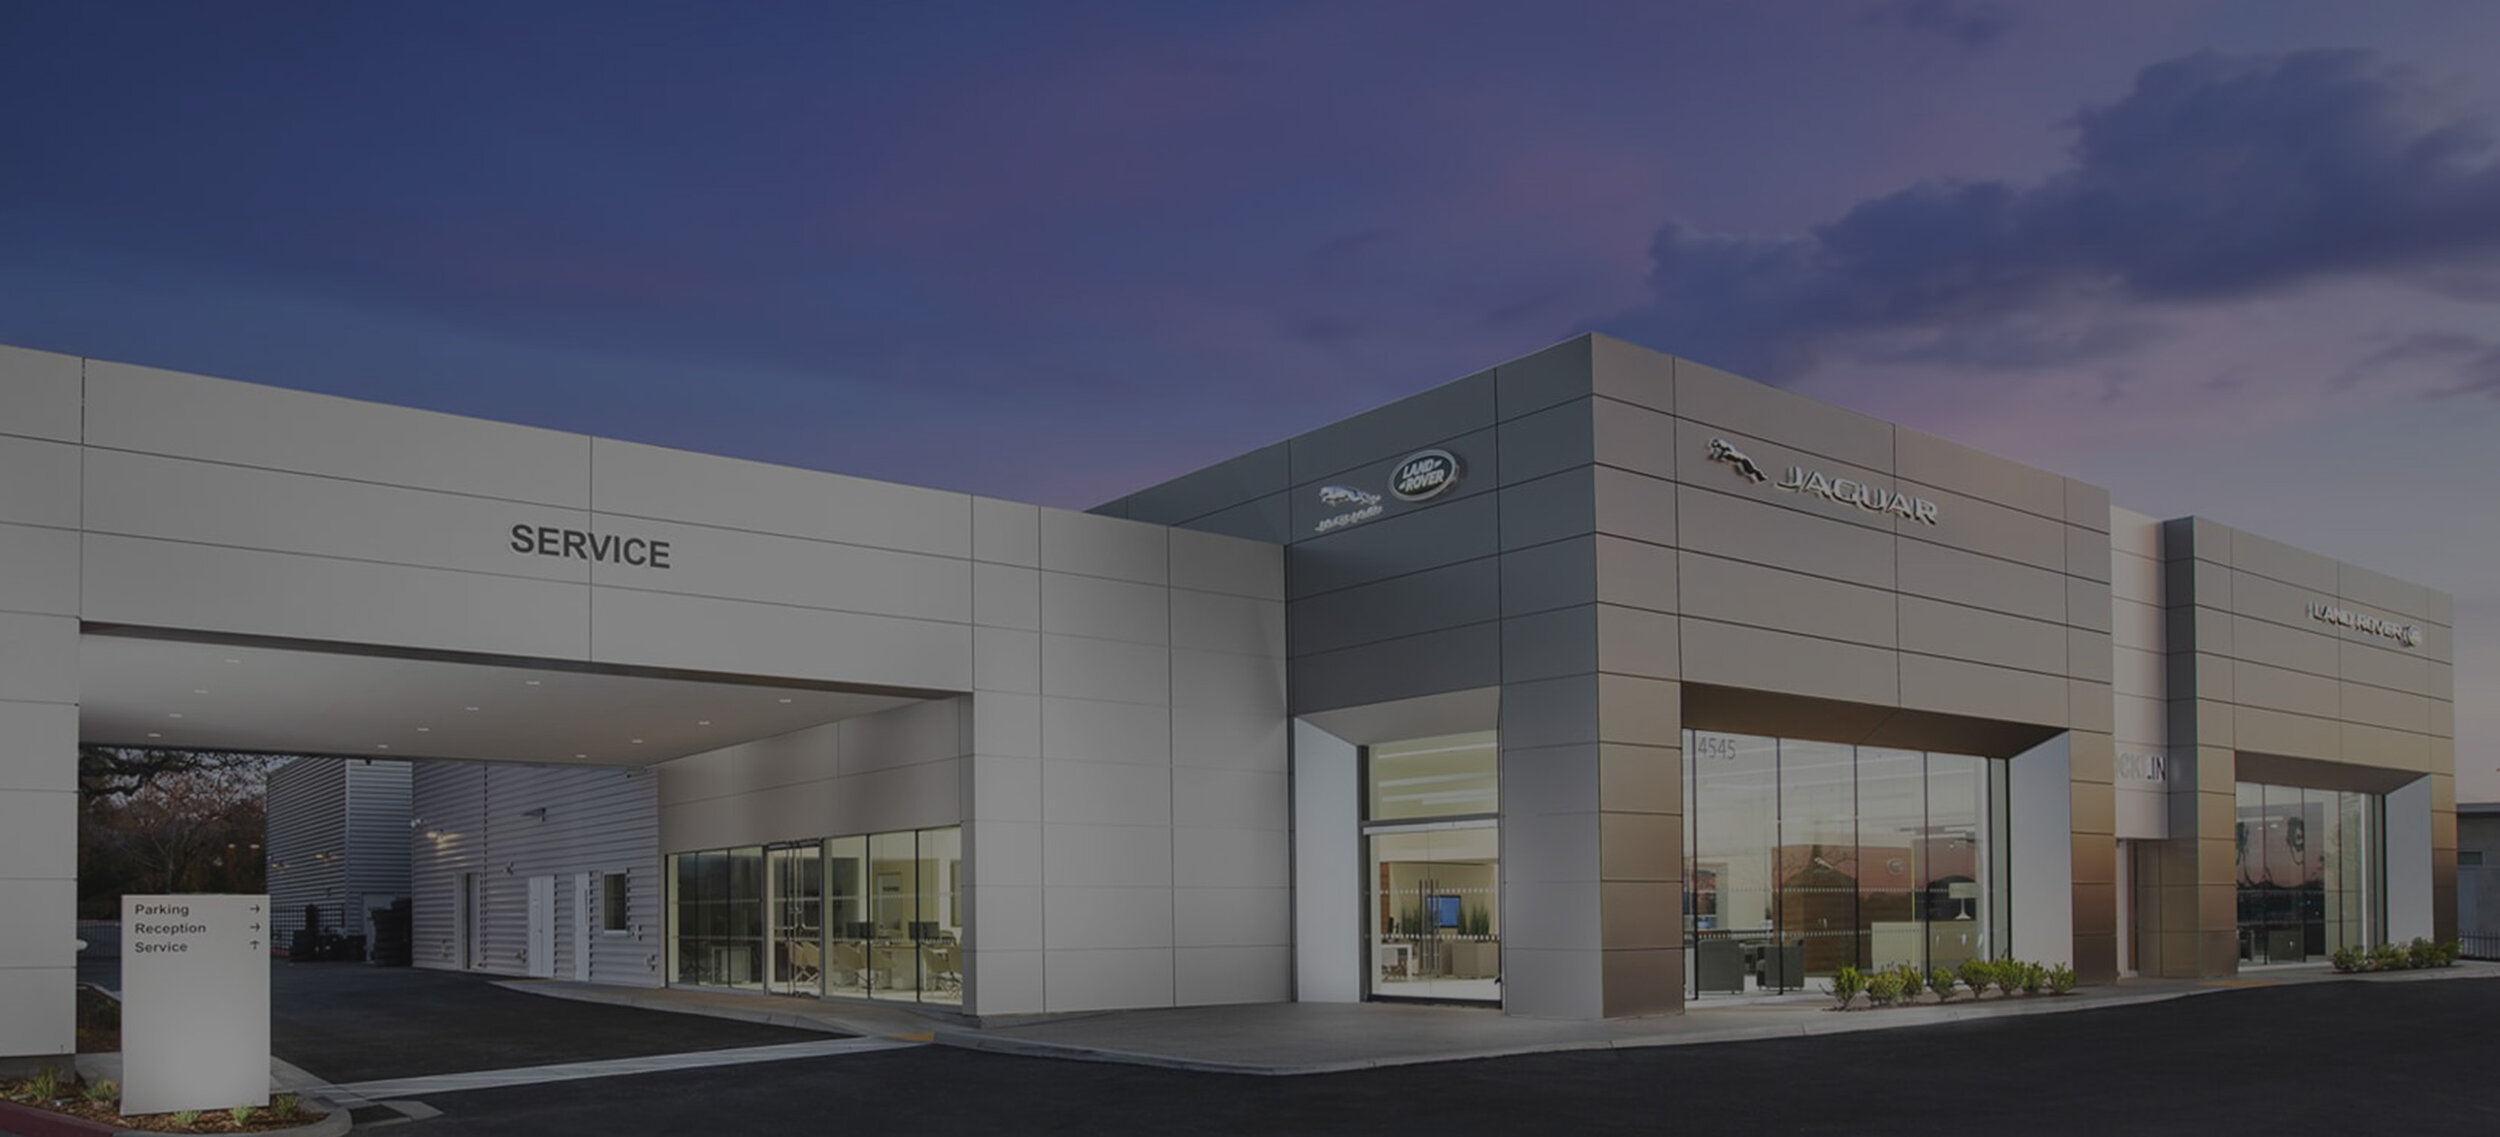  The extensive remodel of an existing dealership into a Jaguar/Land Rover dual design grew out of a merger of the two brands. This 27,500 sq. ft. facility includes two showrooms, personalization studio, customer lounge, and expanded repair garage. Th